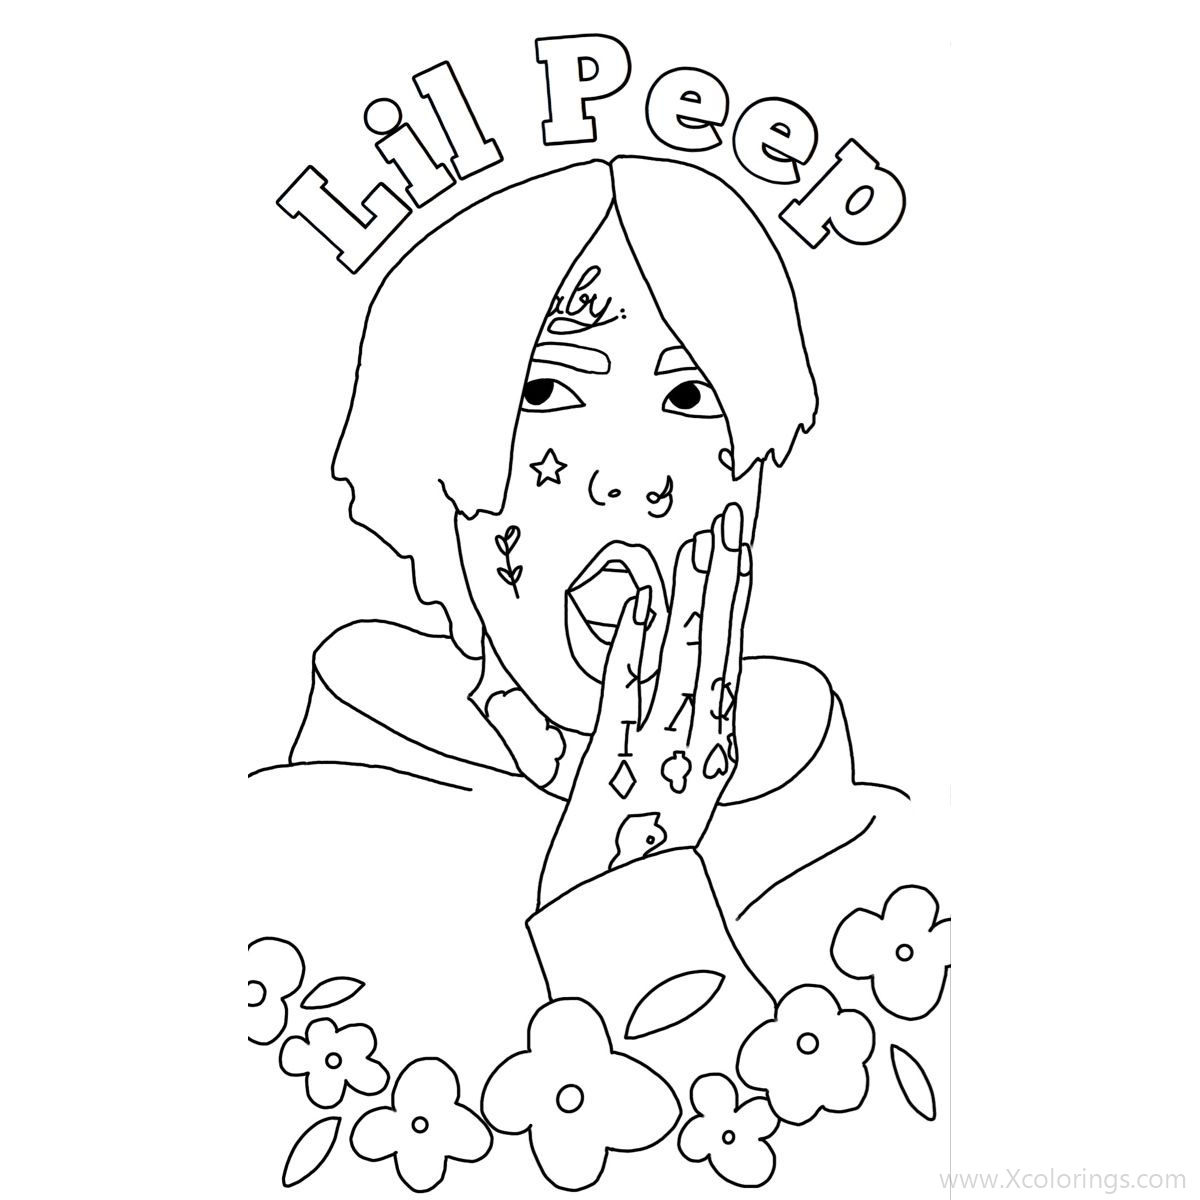 Free Lil Peep Coloring Pages Linear printable